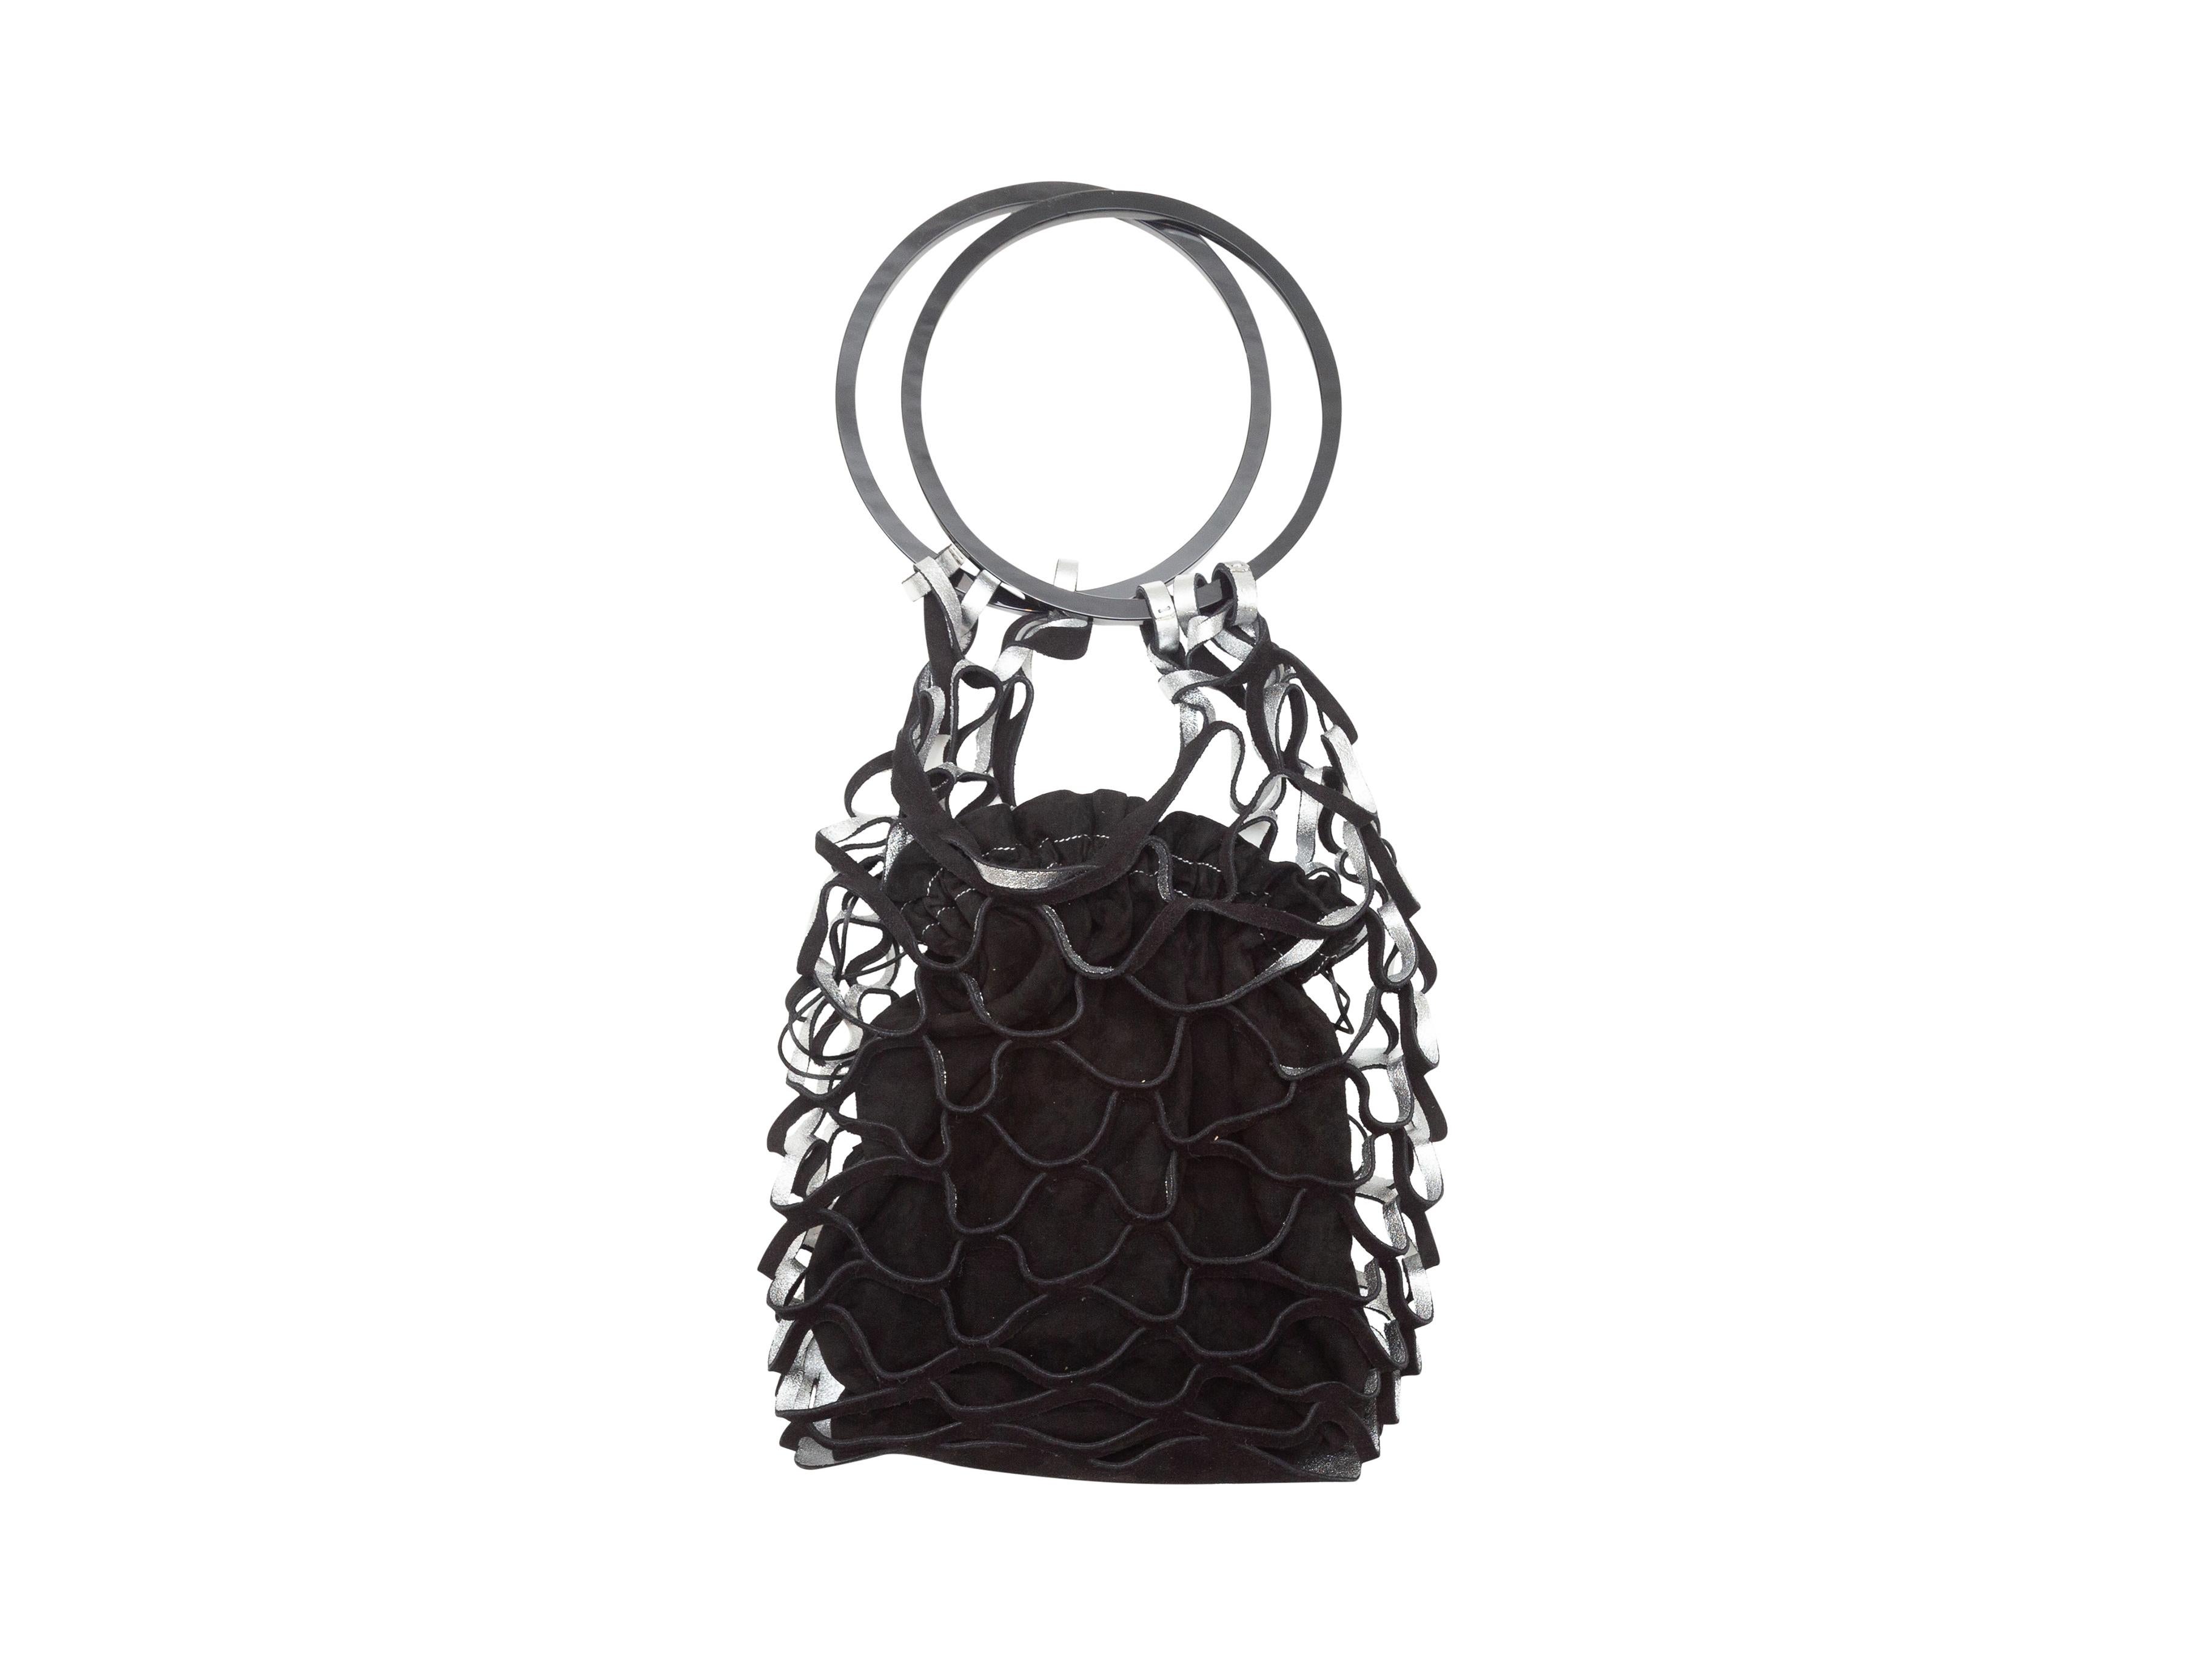 Product details: Black & Silver Salvatore Ferragamo Suede Net Handbag. This bag features a suede body and dual metal ring handles. 9.5